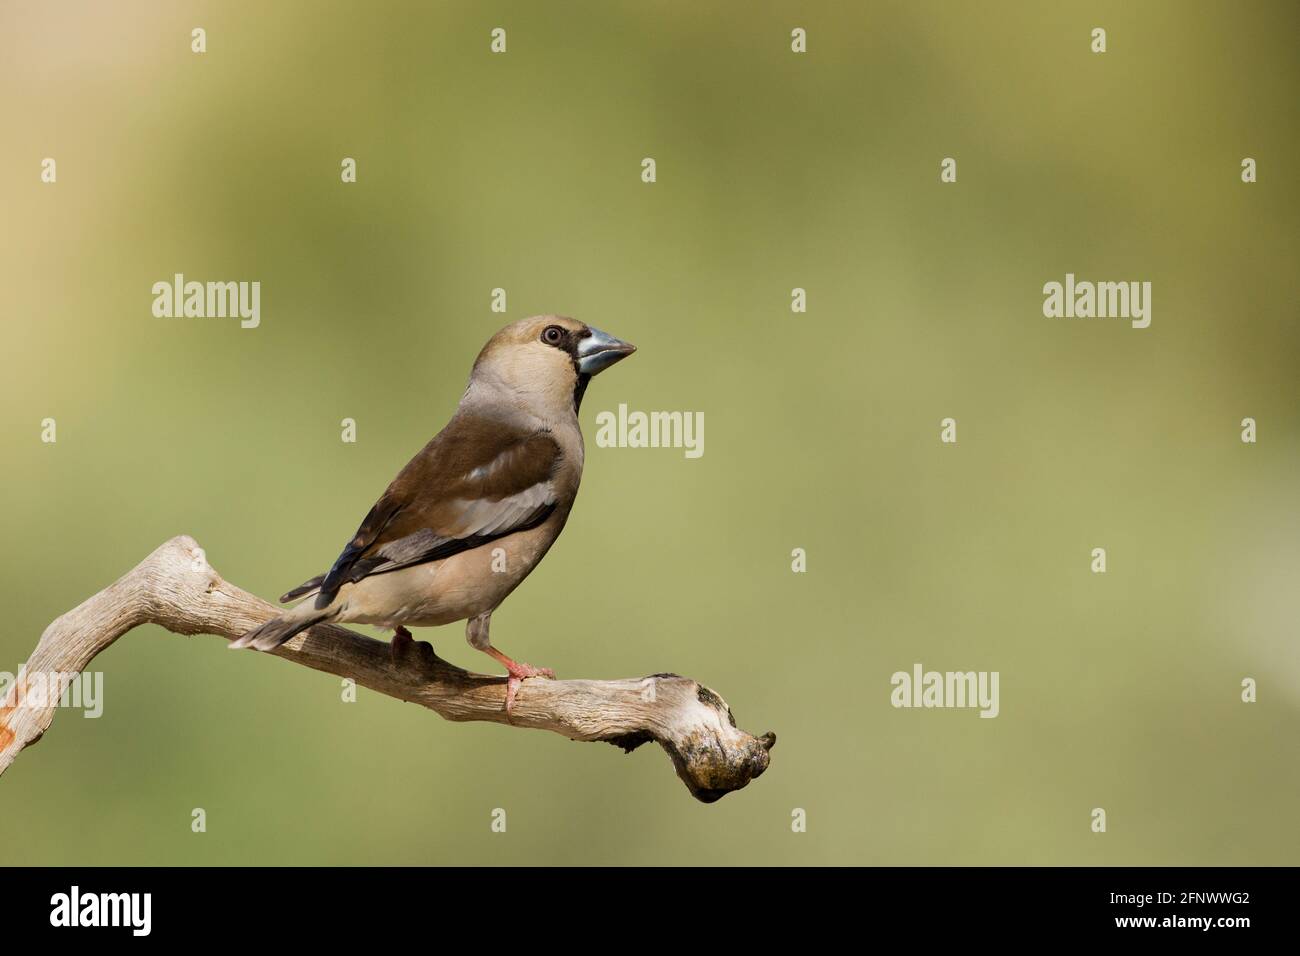 hawfinch (Coccothraustes coccothraustes) Stock Photo